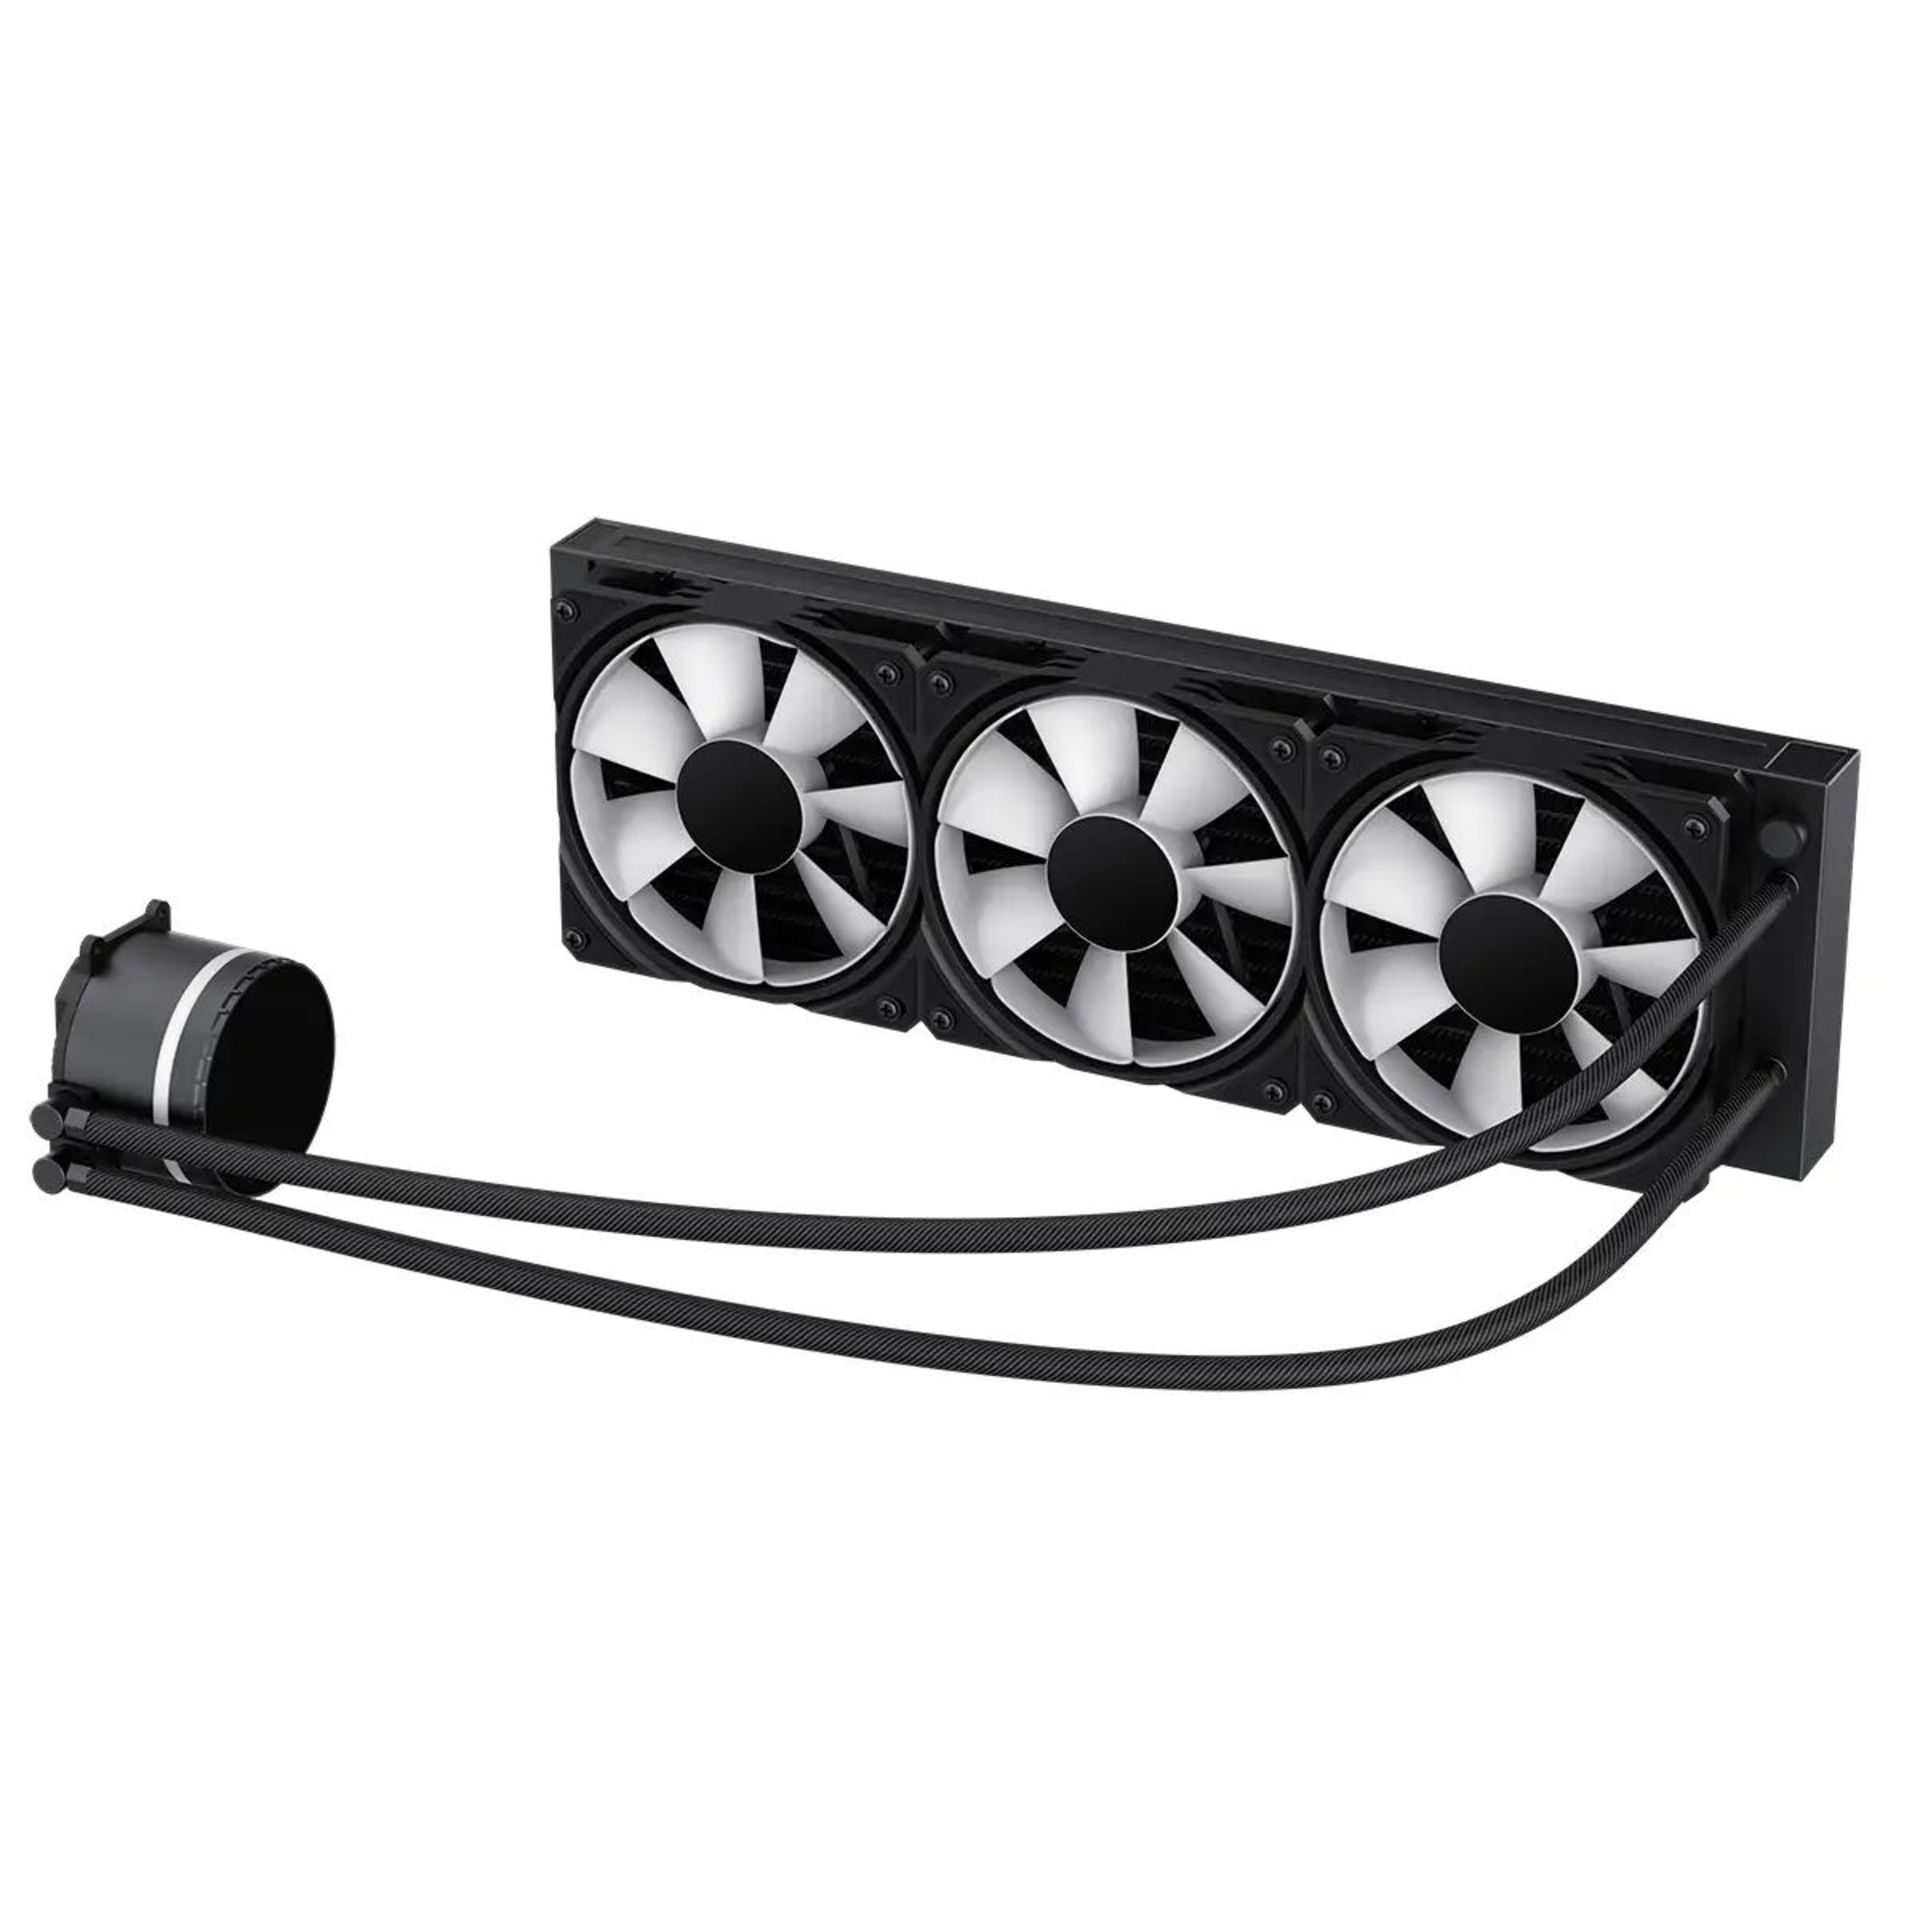 BRAND NEW FACTORY SEALED GAMEMAX Iceburg 360mm ARGB All-in-One Liquid Cooler. RRP £79.99. GameMax - Image 4 of 7